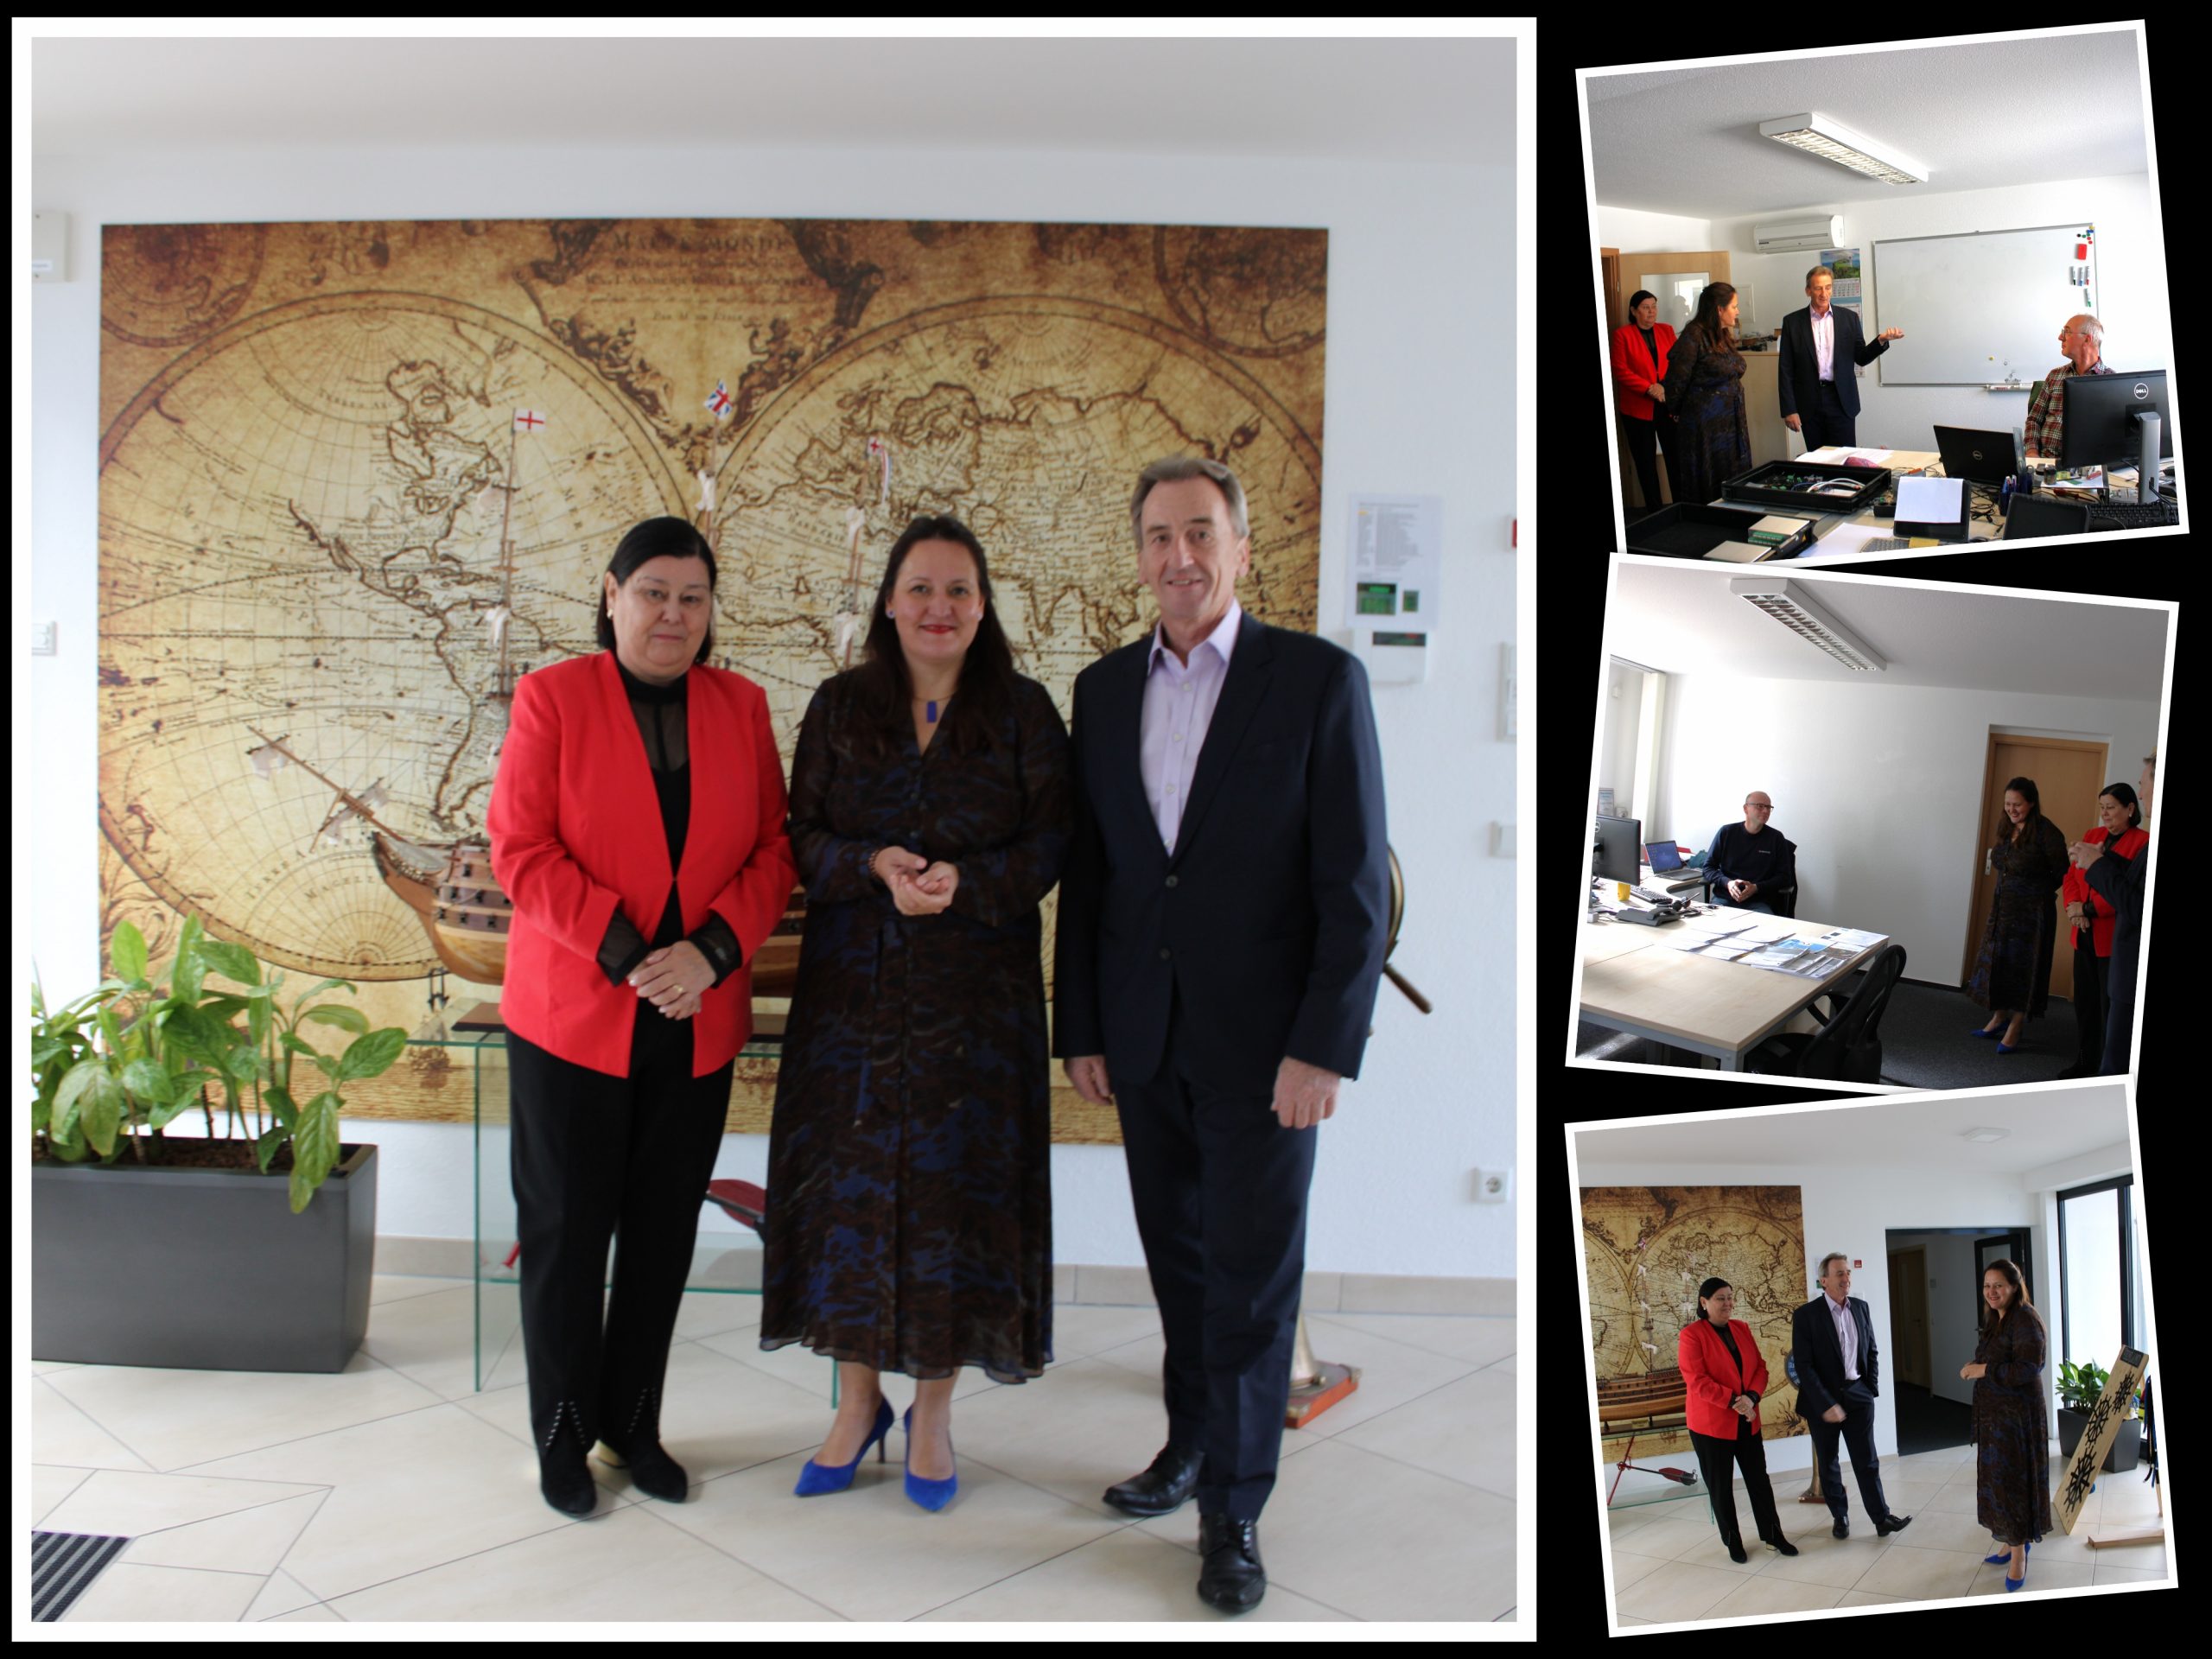 Minister of Science, Research, and Culture of the Federal State of Brandenburg, Dr. Manja Schüle visits VEINLAND GmbH